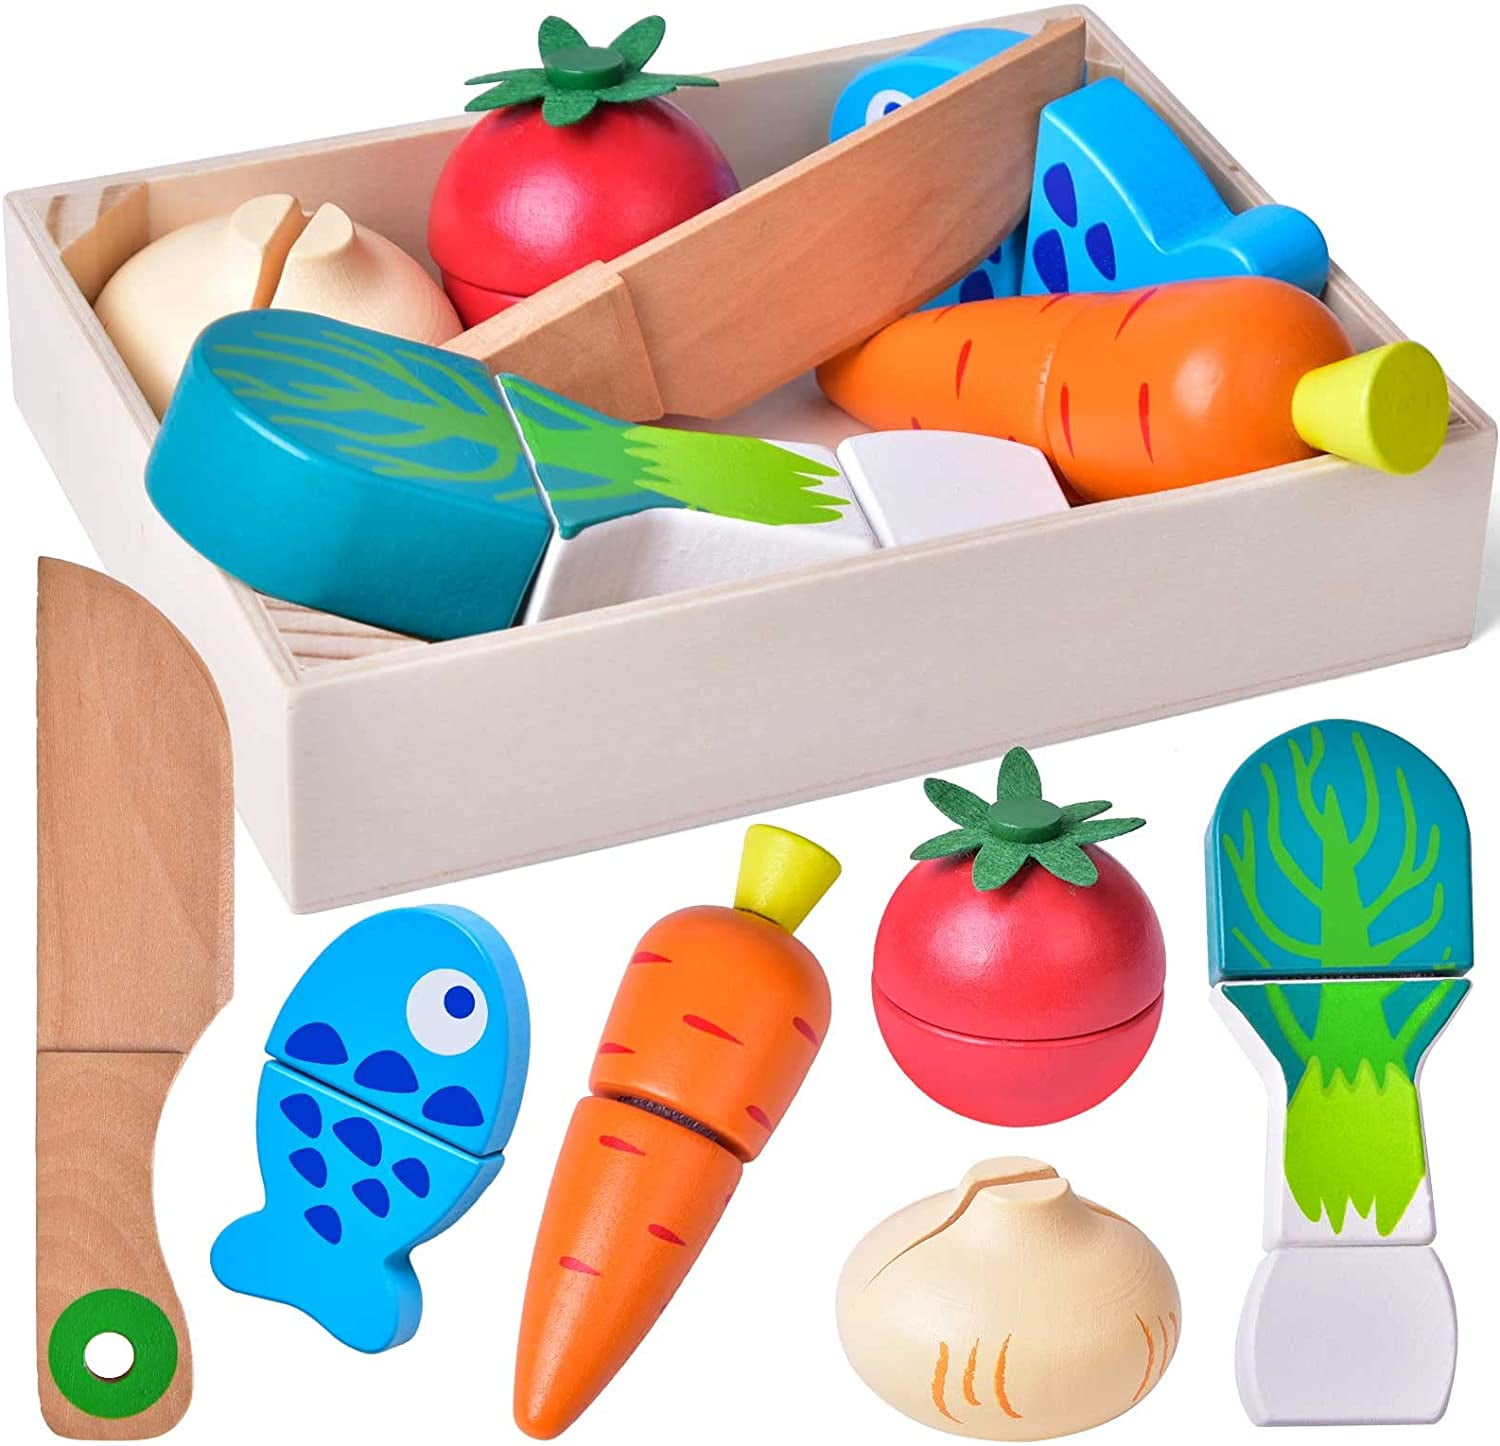 WoodenEdu Cutting Play Food Toy for Kids Kitchen,Wooden Pizza Set Pretend  Play Kitchen Accessories,Learning Toy Birthday Gifts for Boys Girls  Toddlers